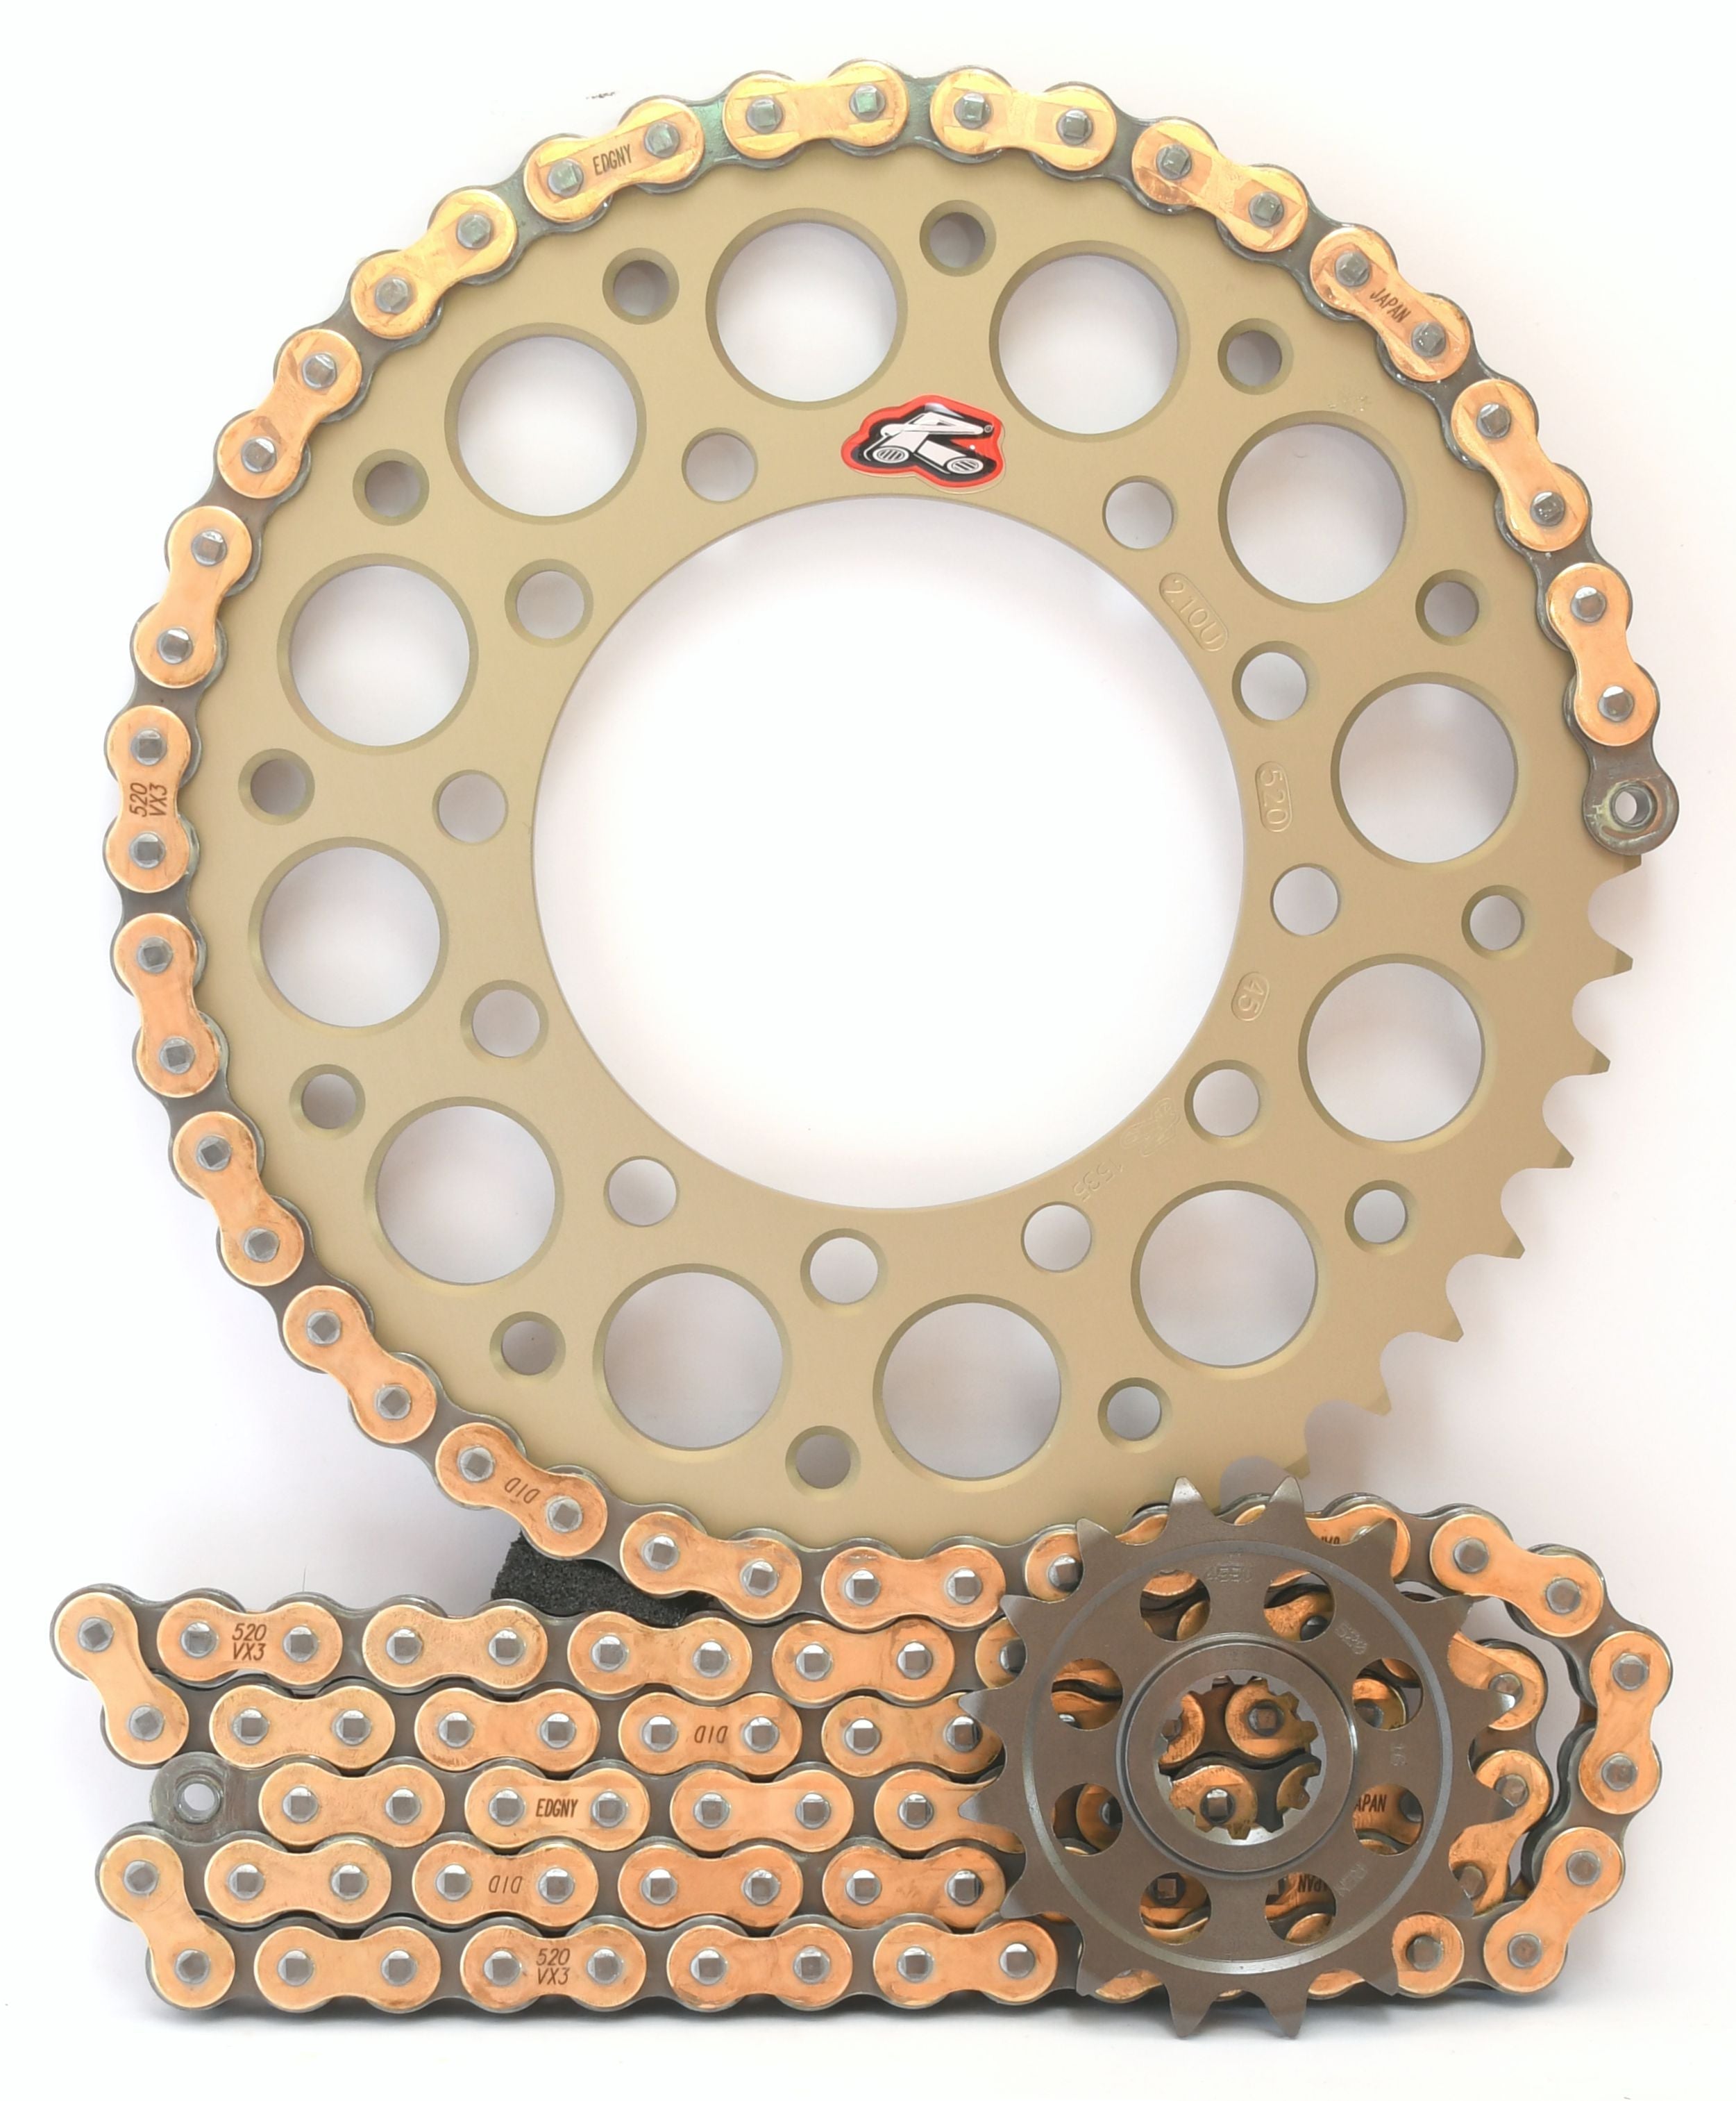 Renthal Ultralight DID Chain & Sprocket Kit 520 Conversion for Suzuki GSX-R600 2001-2010 - Choose Your Gearing